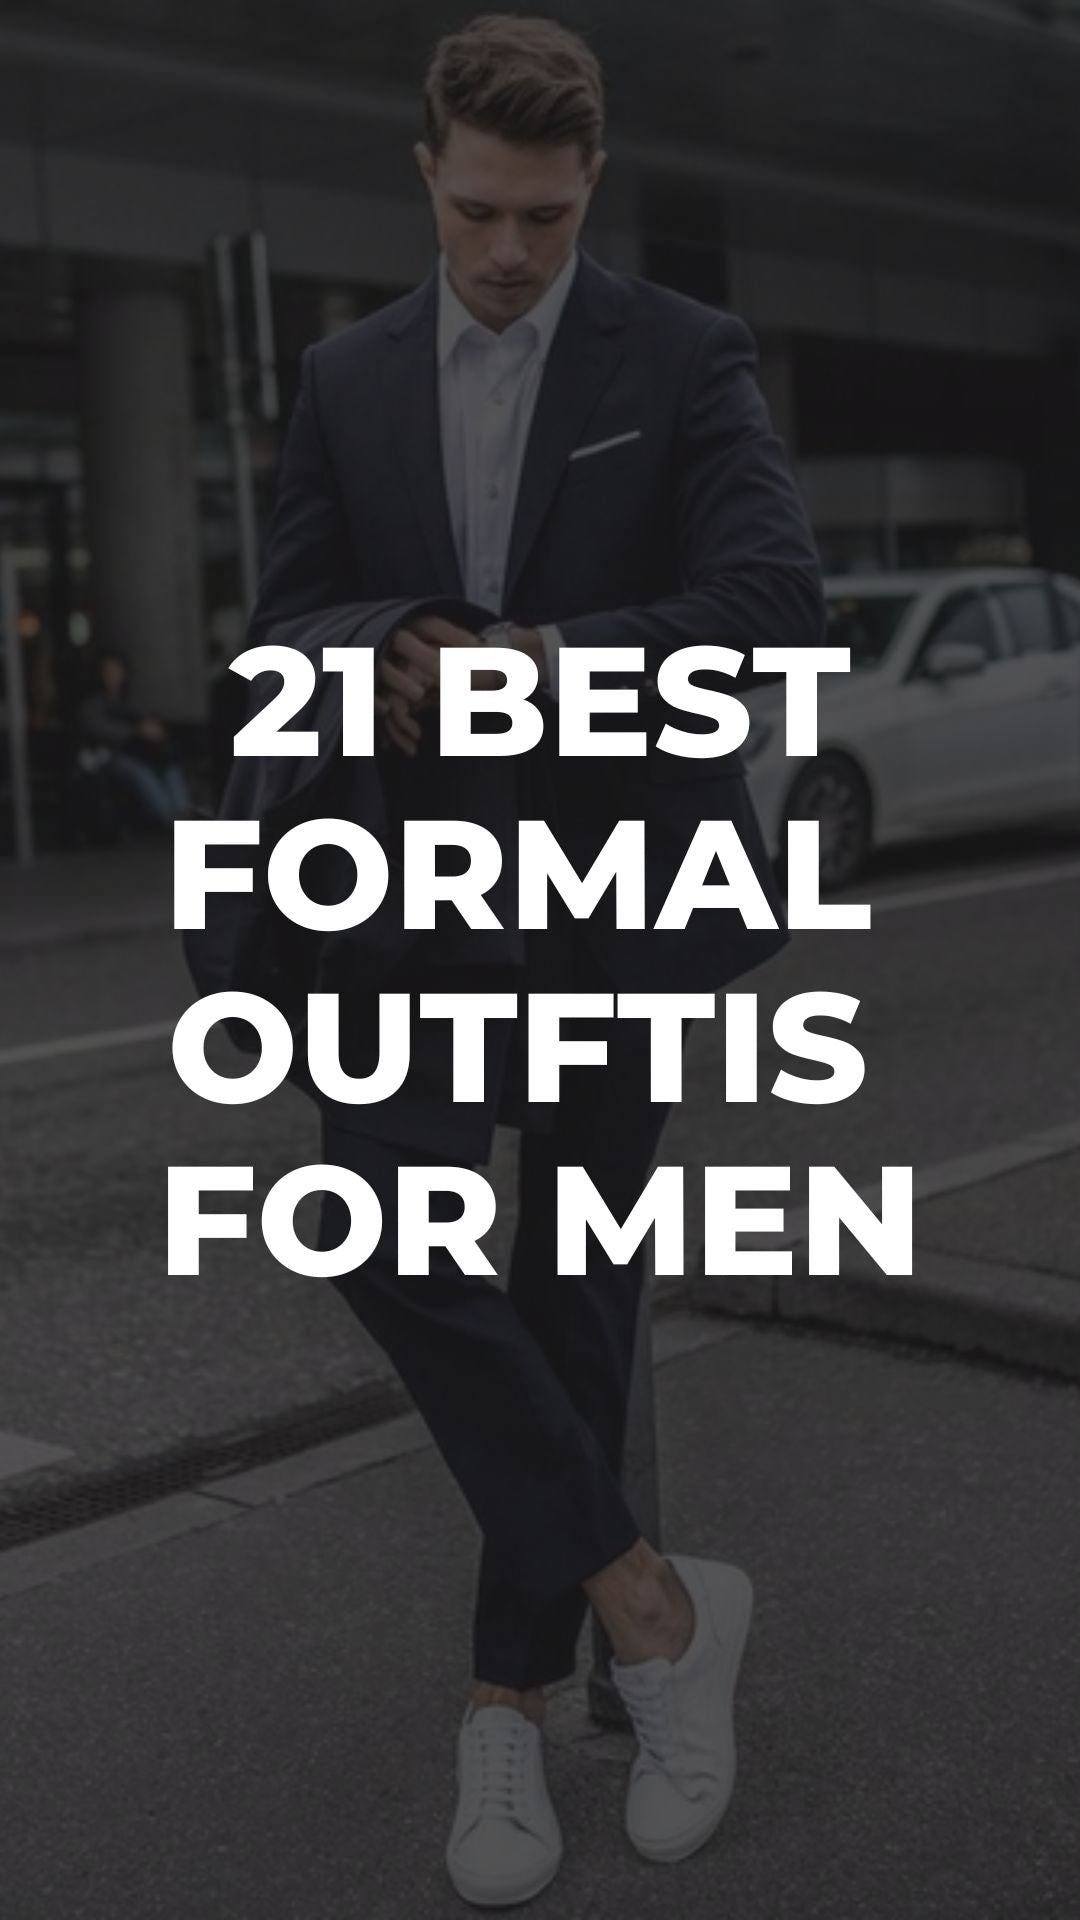 Best Formal Outfits For Men